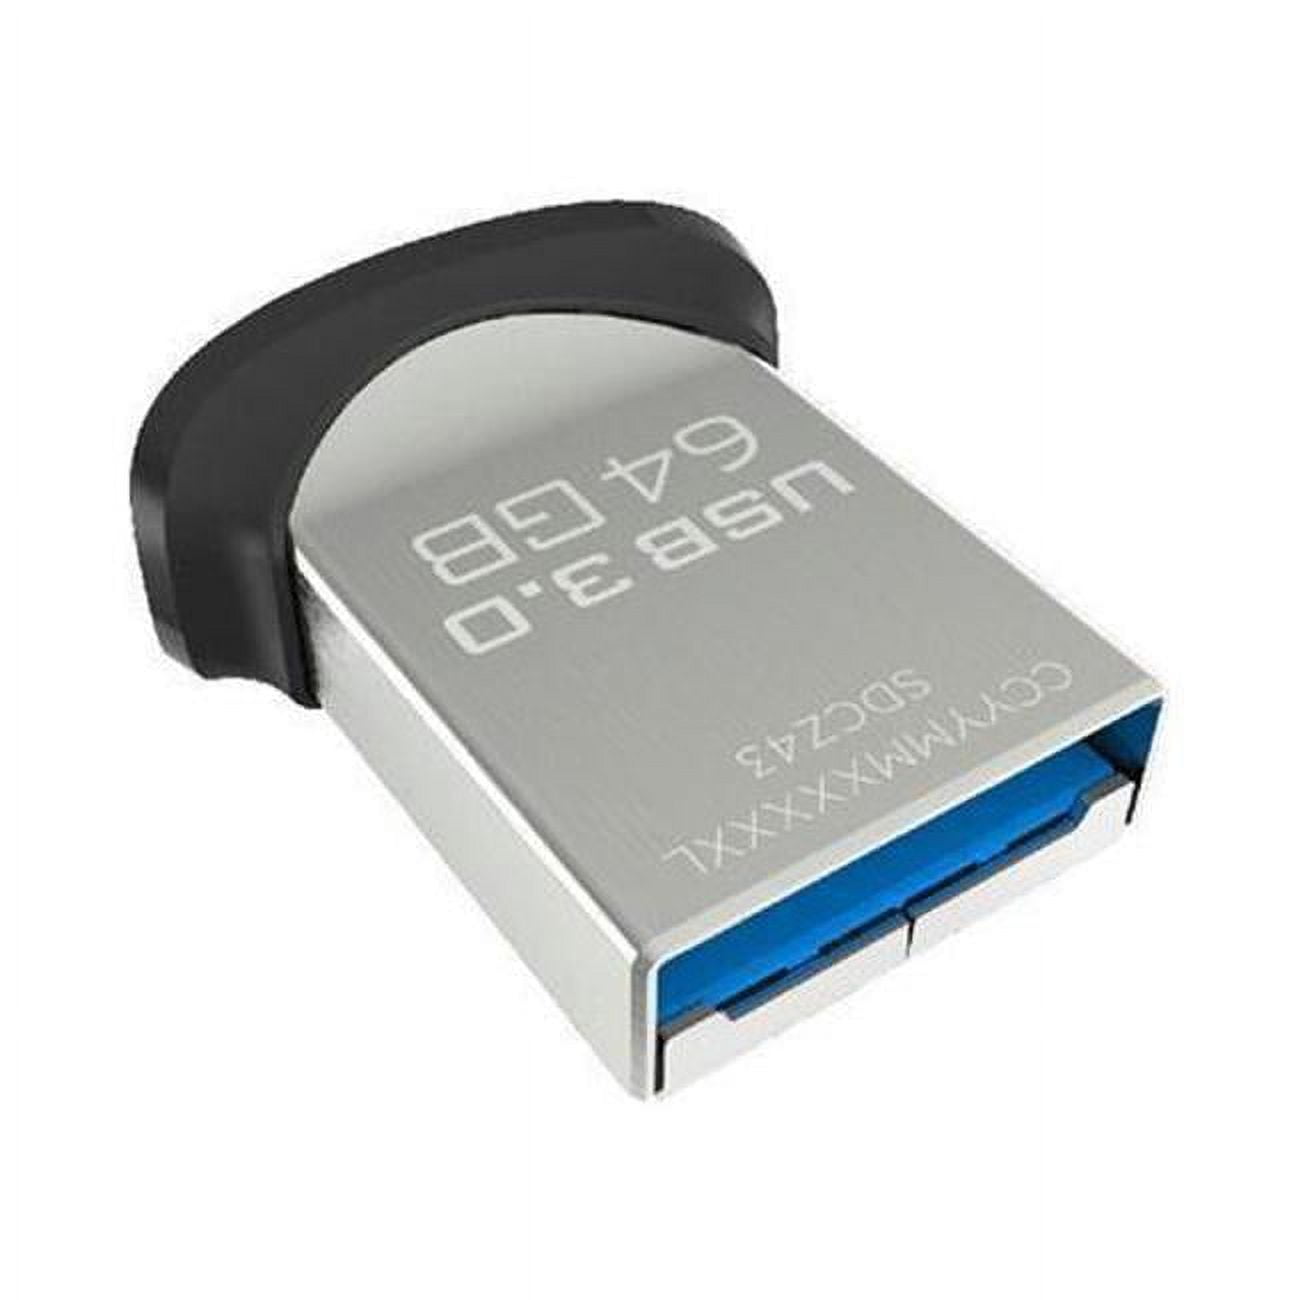 Picture of Sandisk SDCZ430-064G-A46 64 GB USB Flash Drive